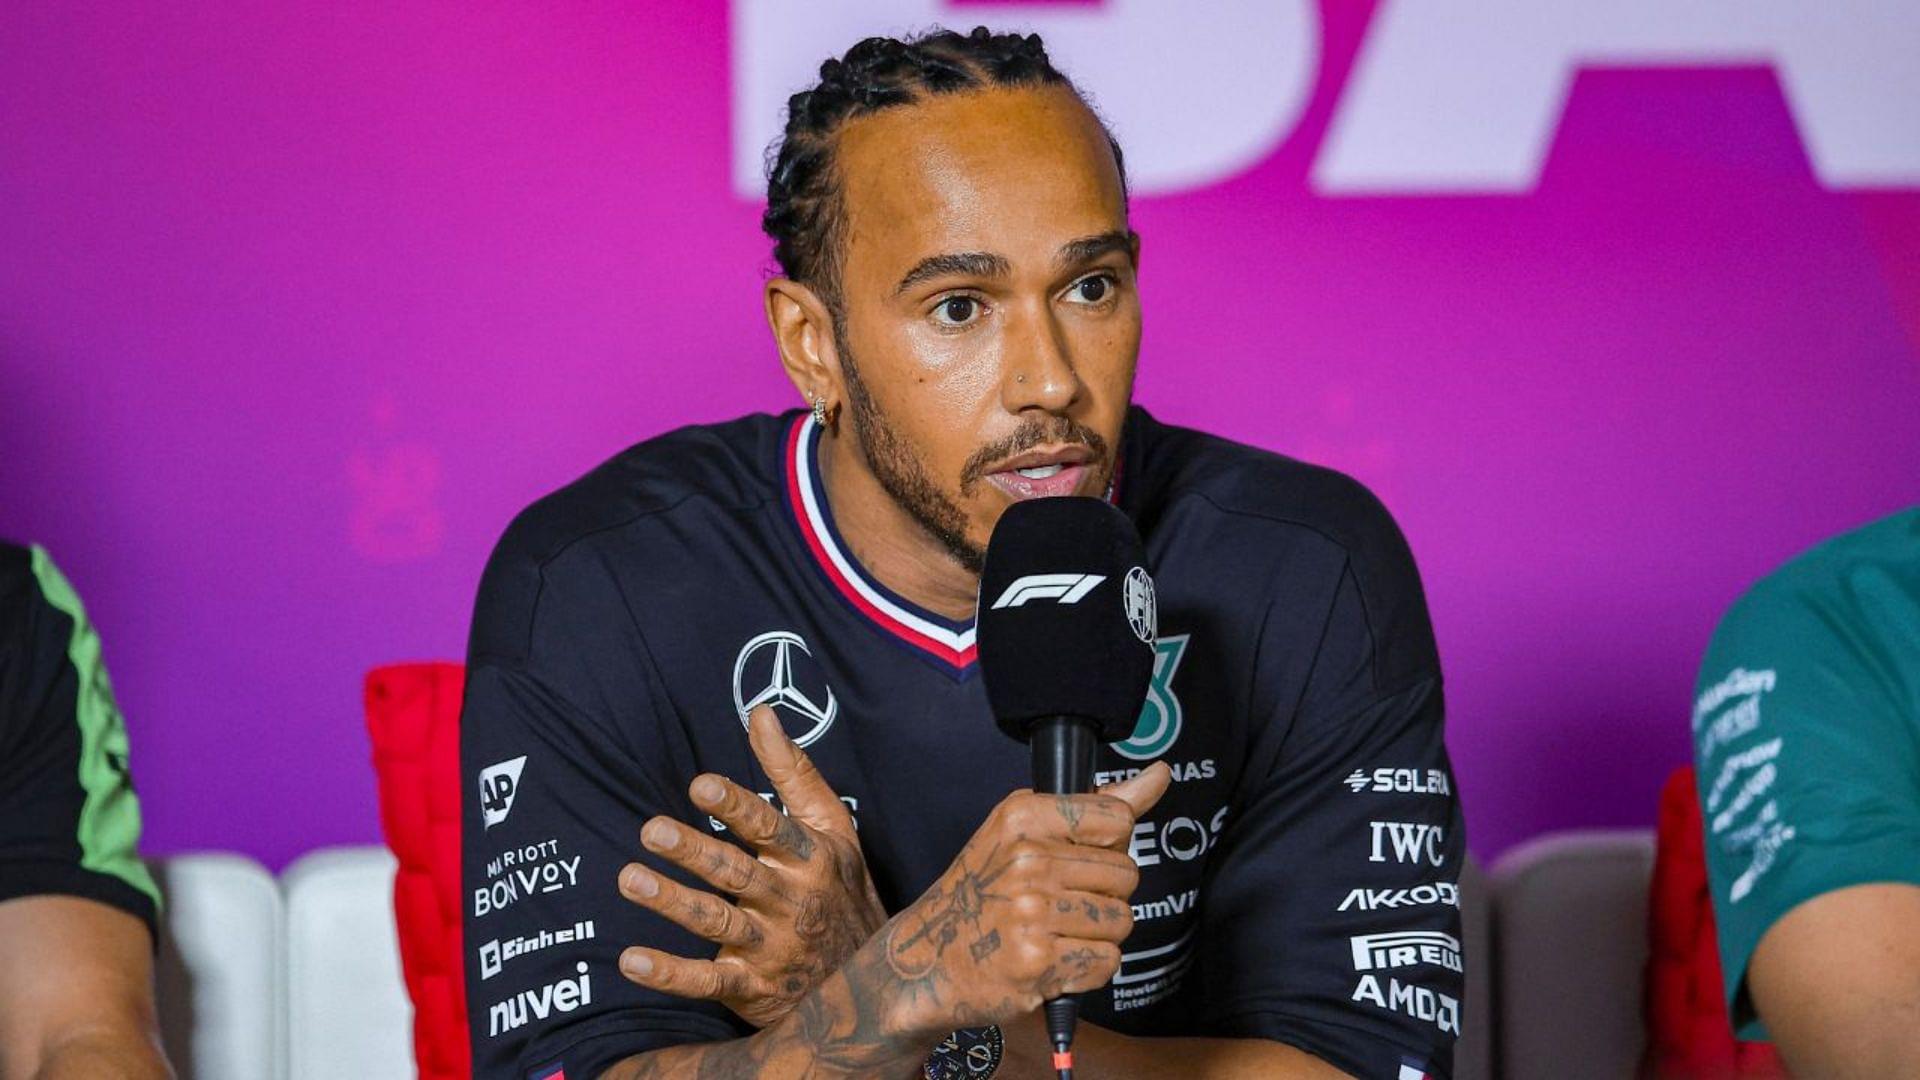 Gresini Likely to Snub Lewis Hamilton’s Acquisition Advances Because of Liberty Media